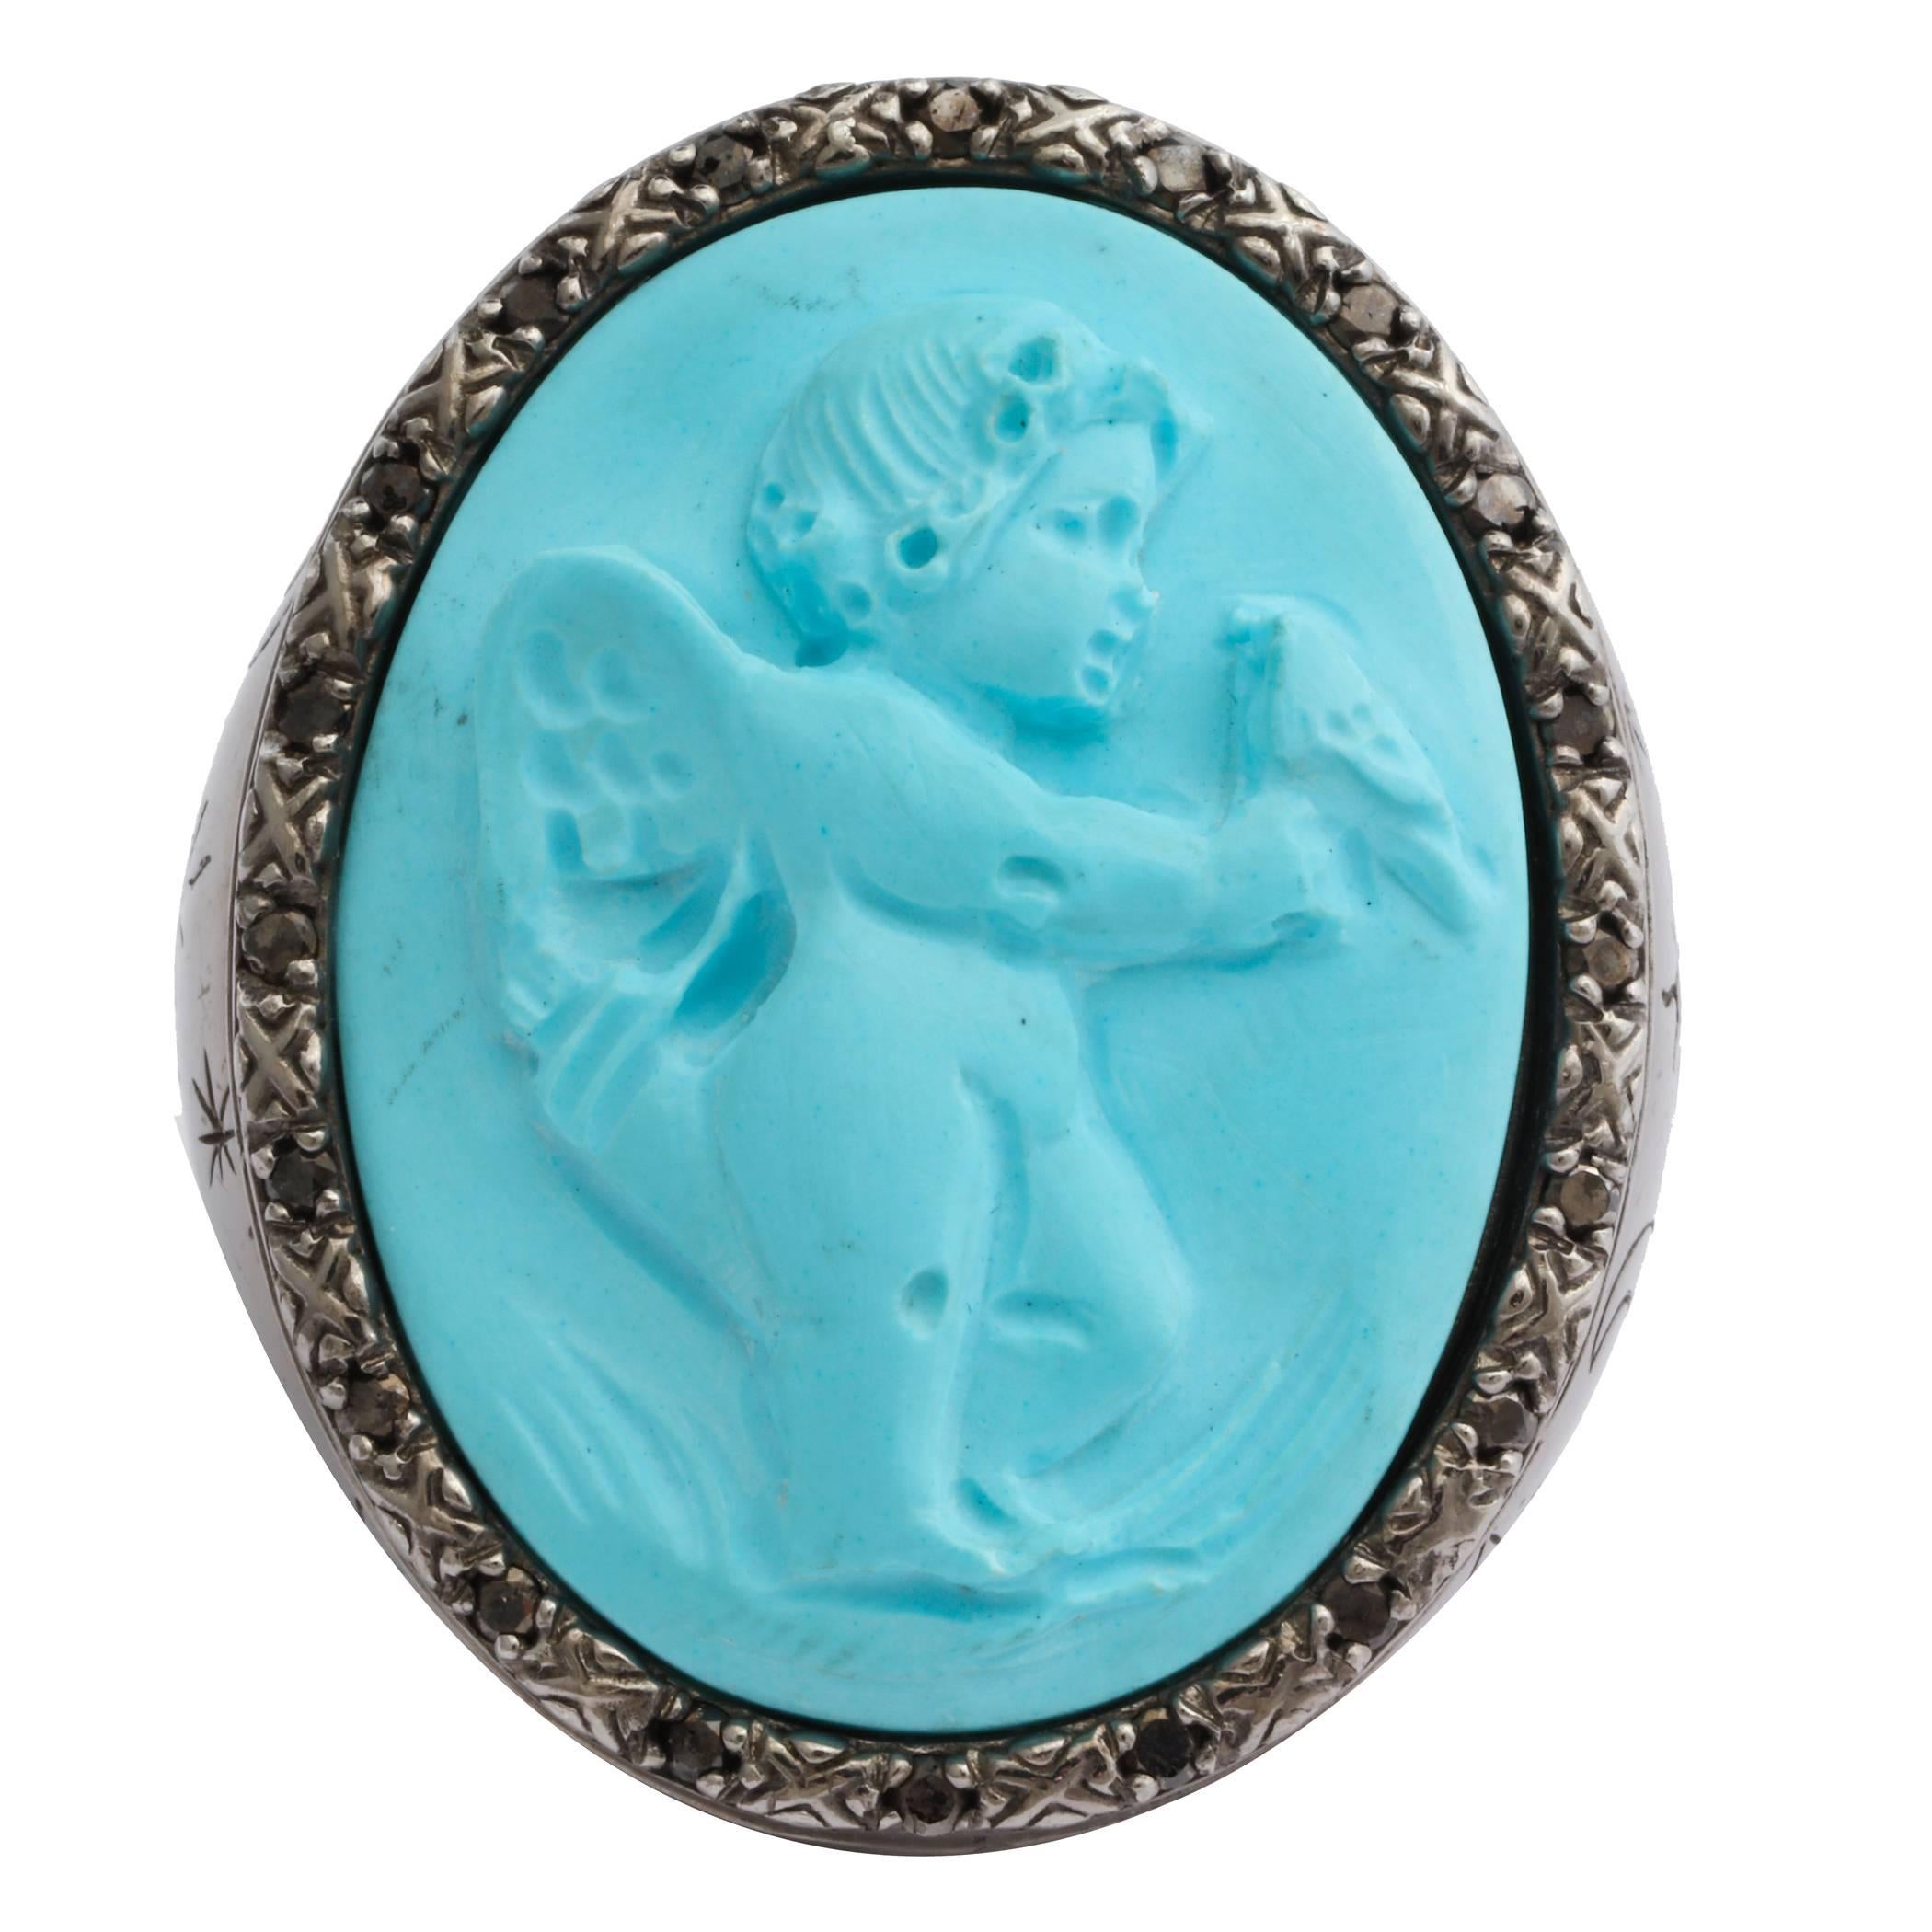 30mm turquoise cameo hand-carved, set in sterling silver black rhodium plated ring with black diamonds.
Ring Size: US7.75

*Being these are hand crafted one of a kind designs, not all ring sizes might be immediately available. We offer custom sizing